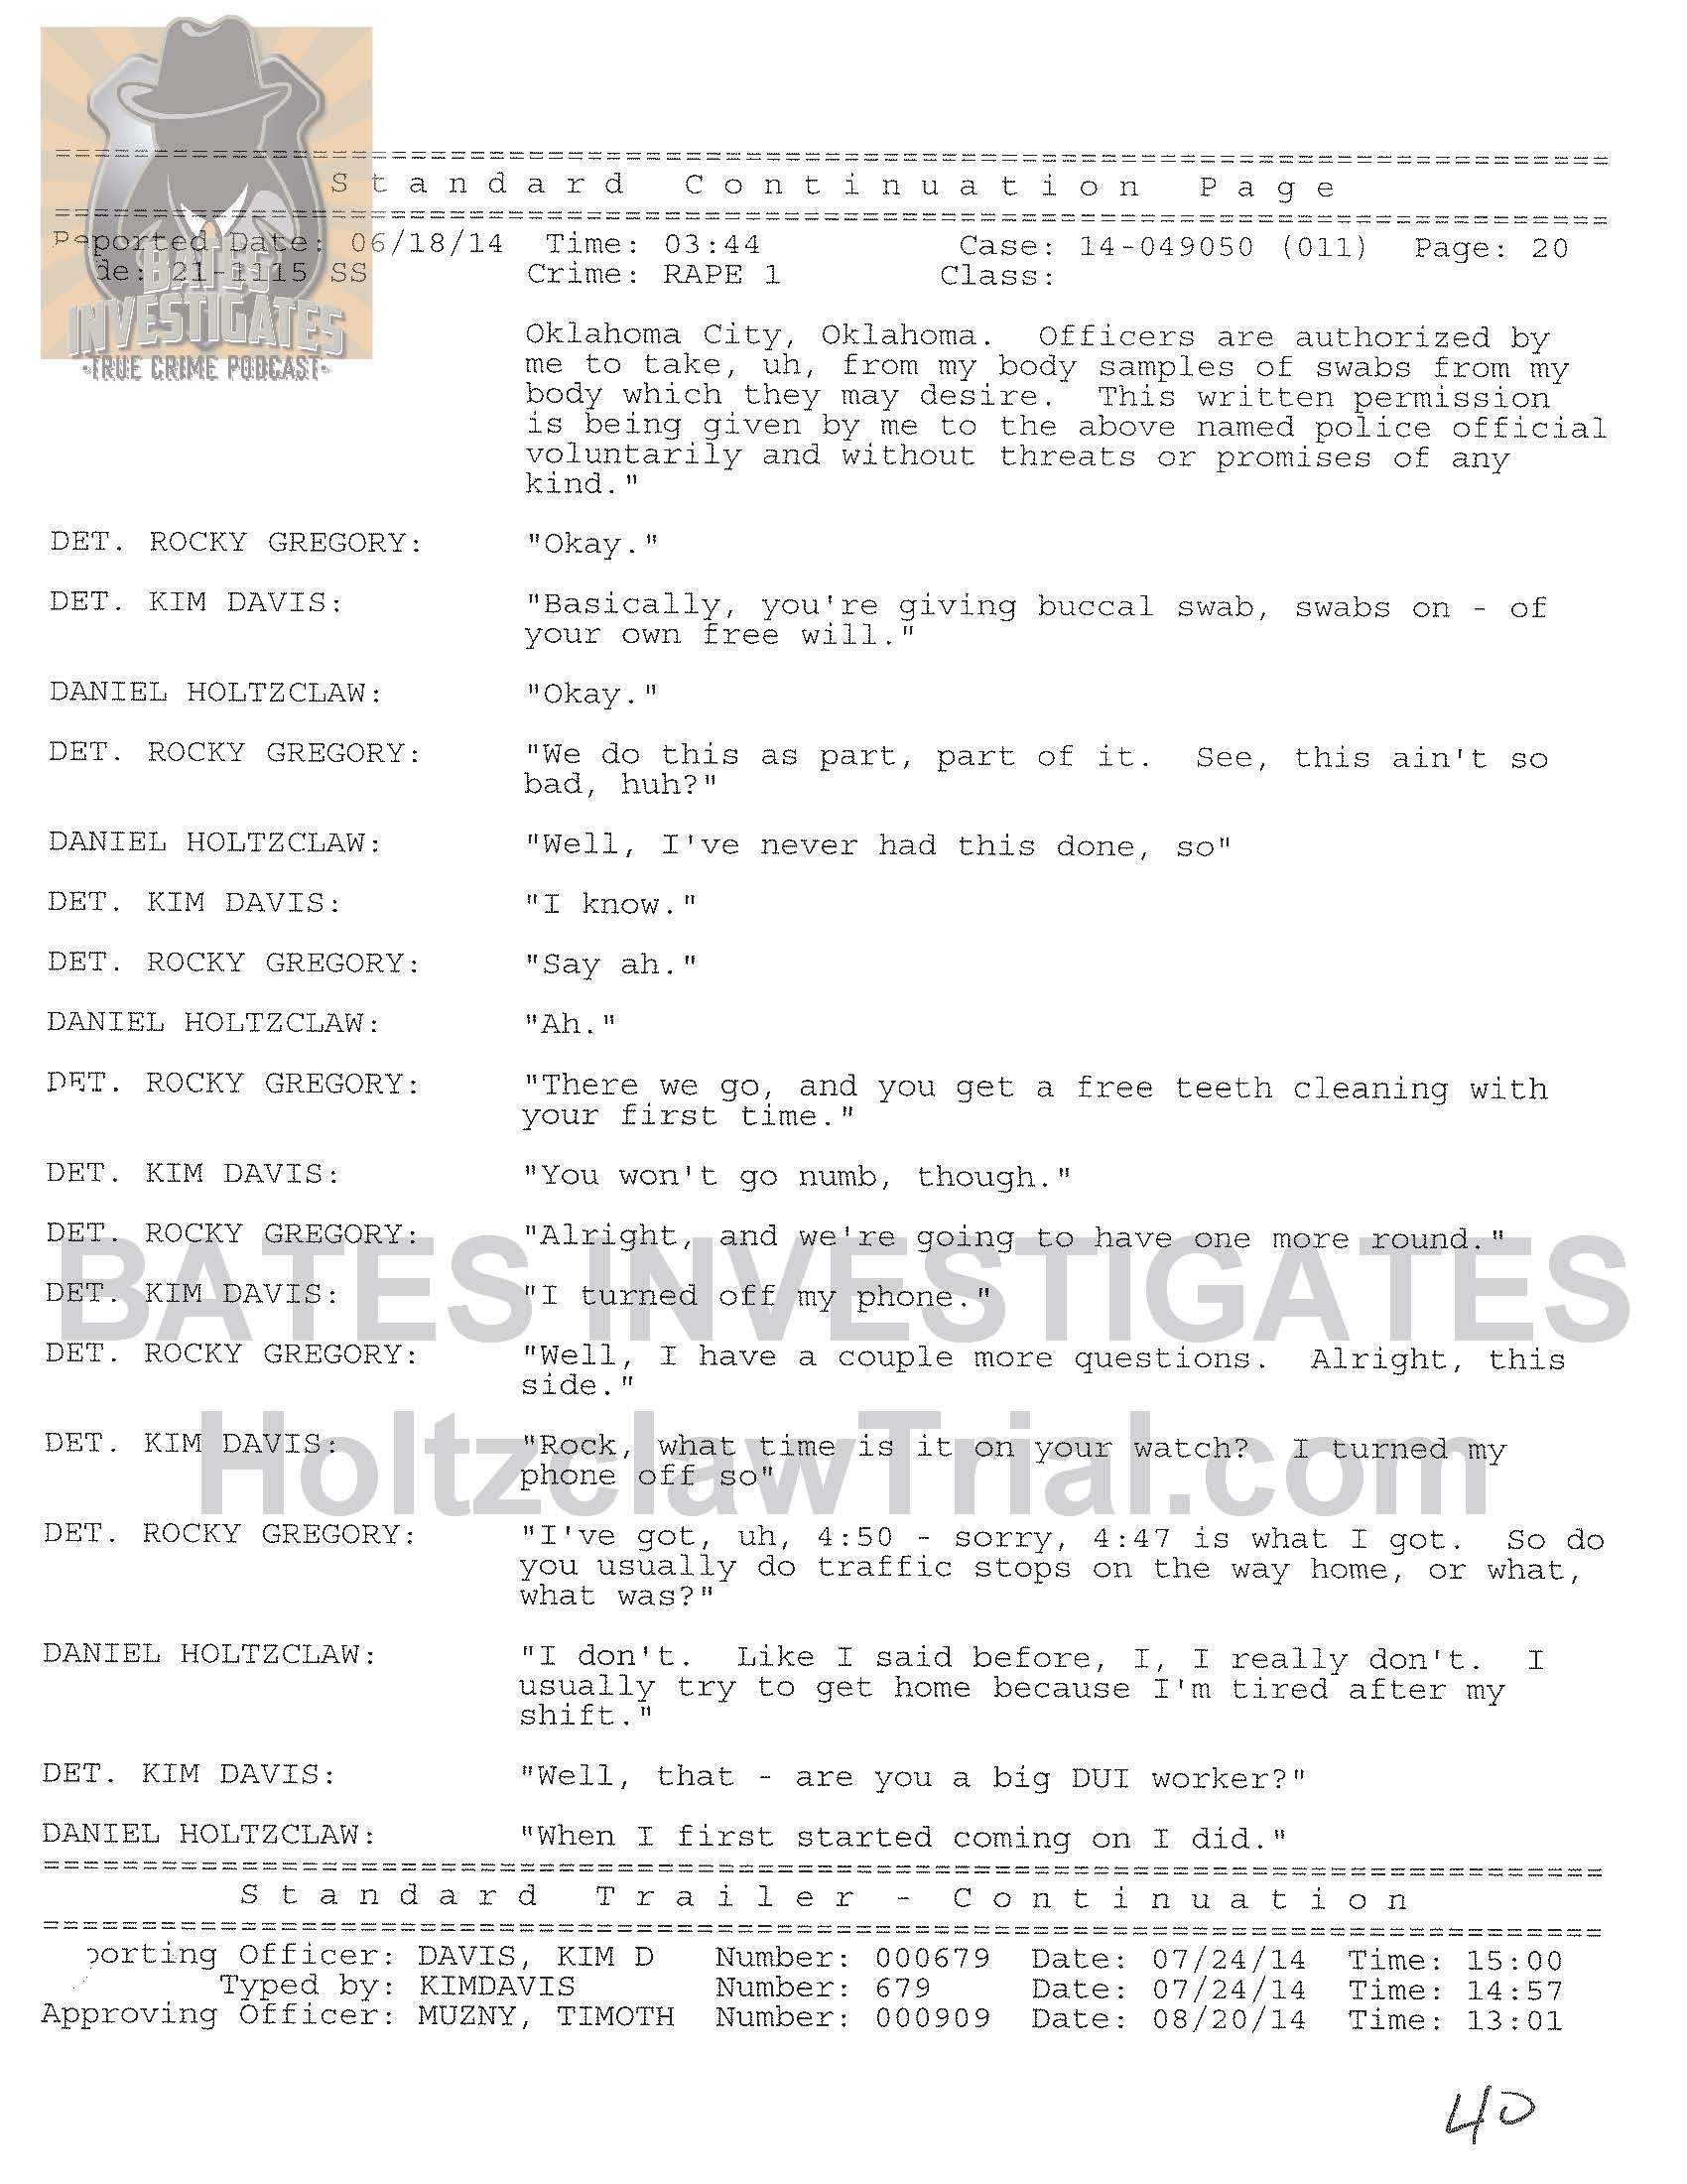 Holtzclaw Interrogation Transcript - Ep02 Redacted_Page_20.jpg